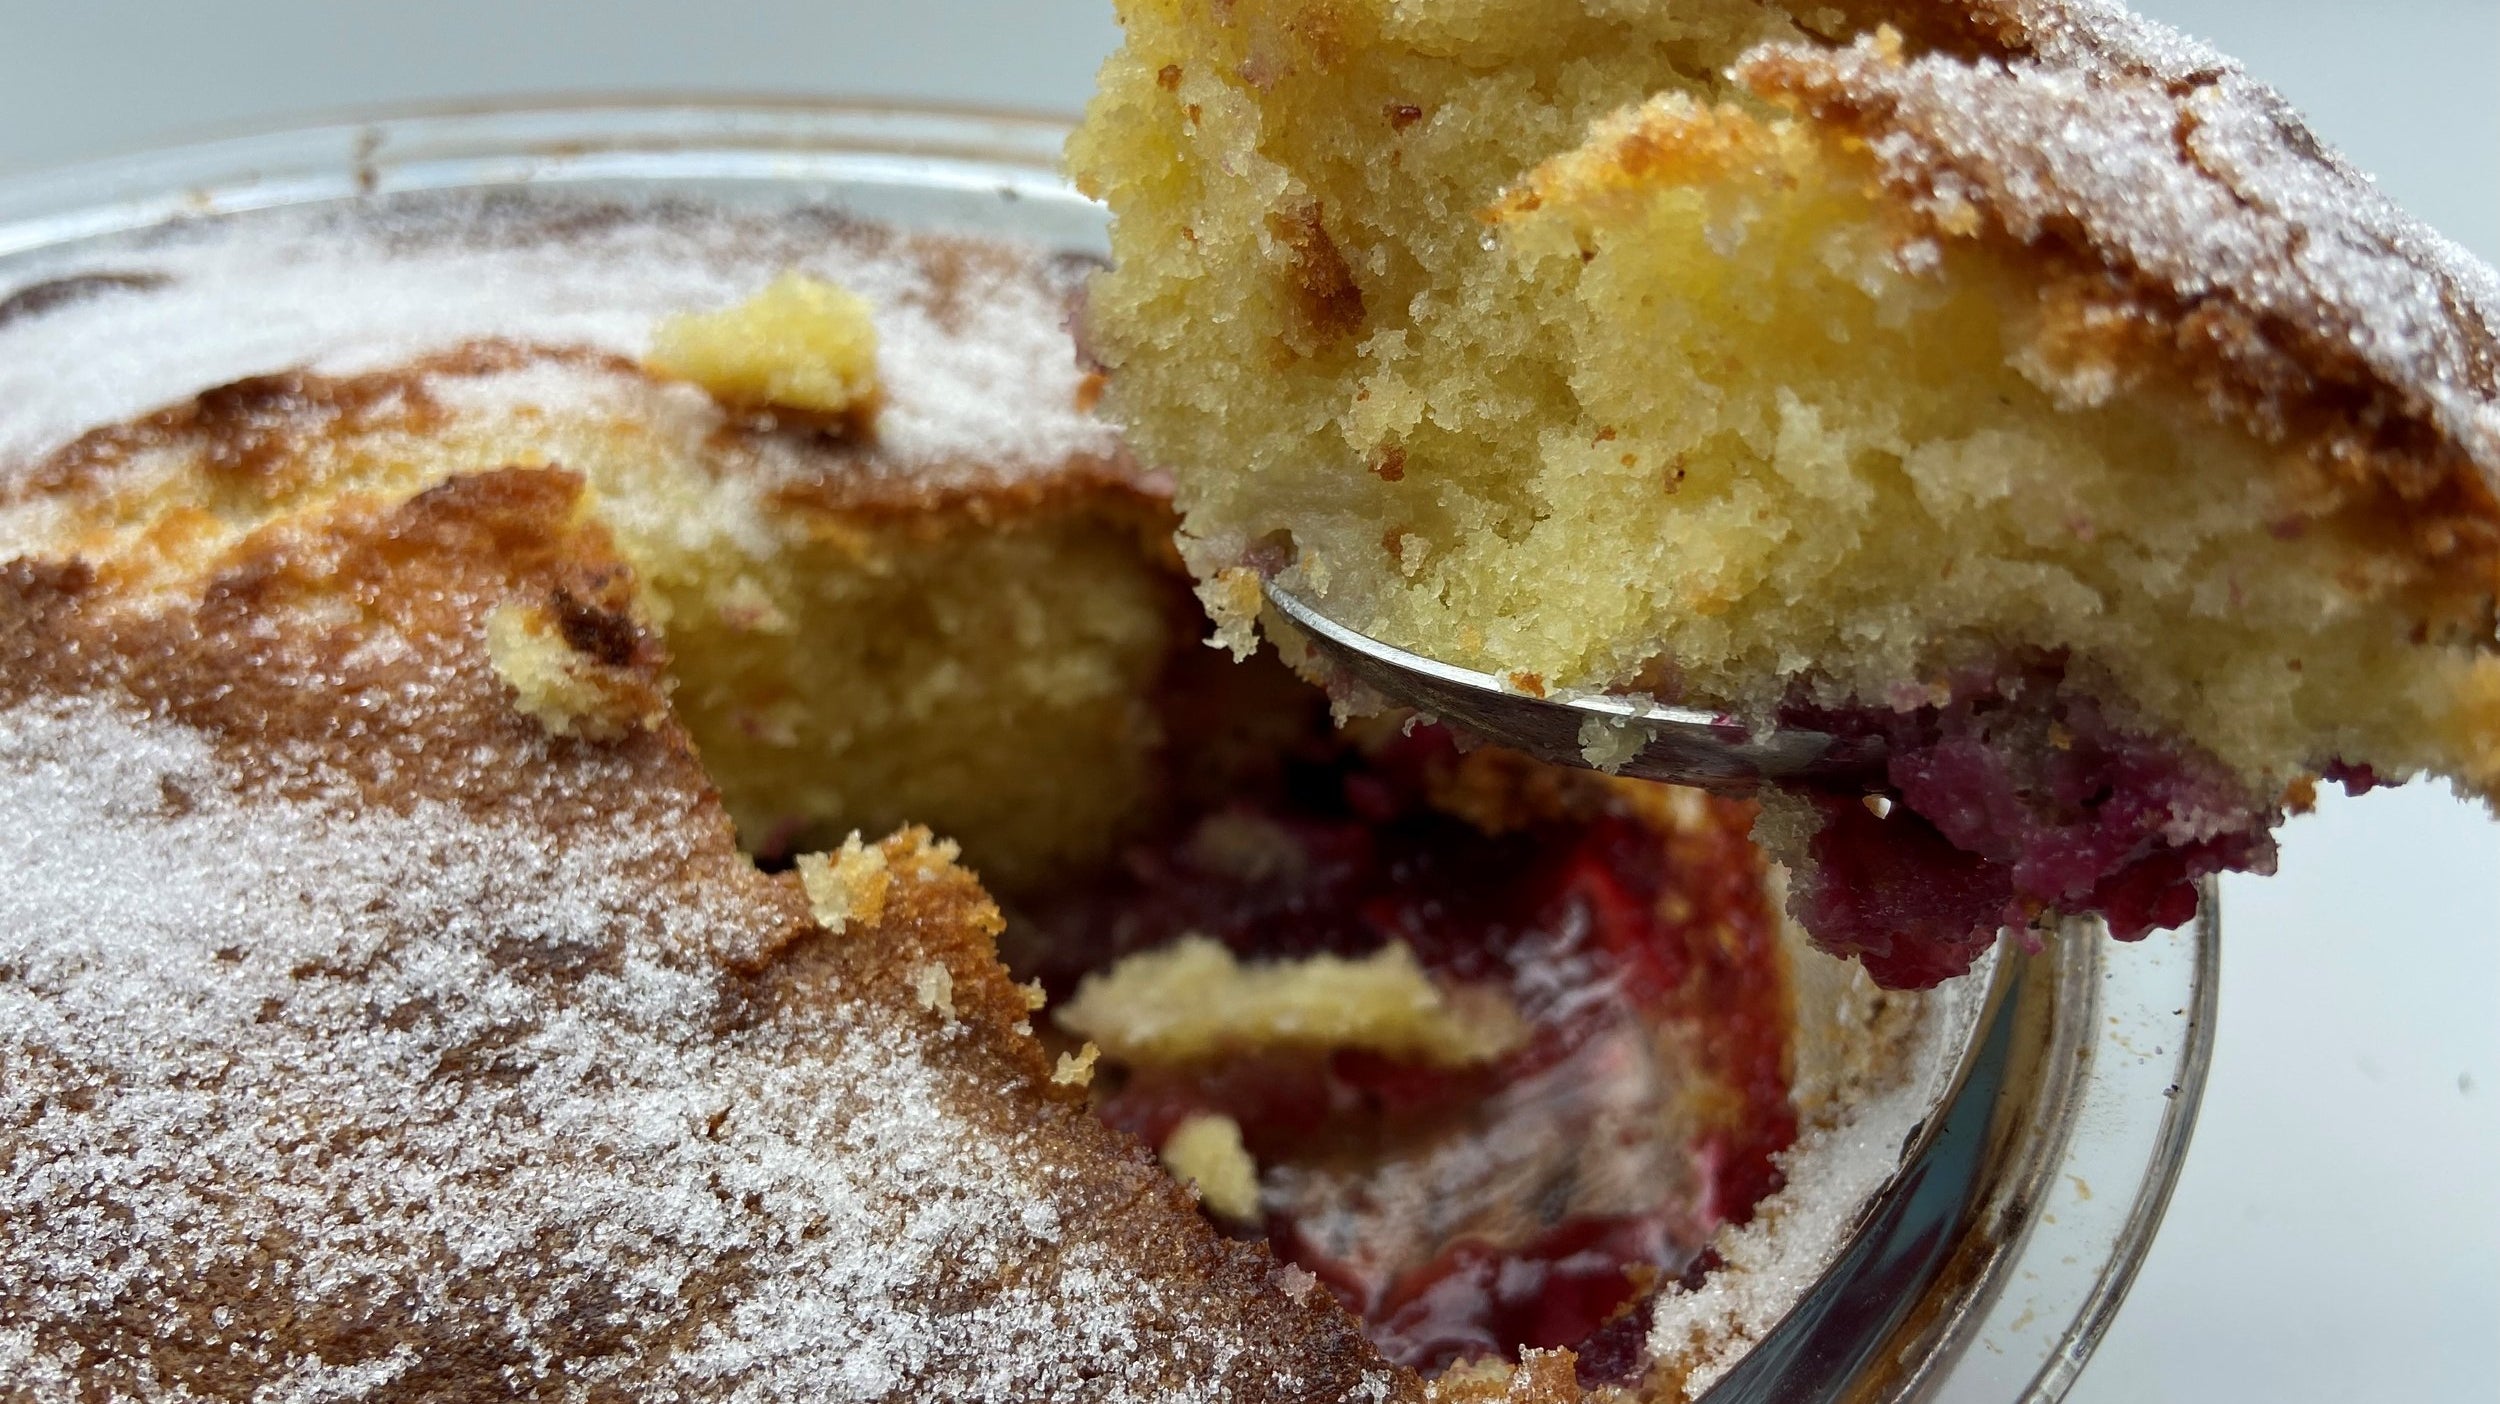 Baked blackberry and apple pudding